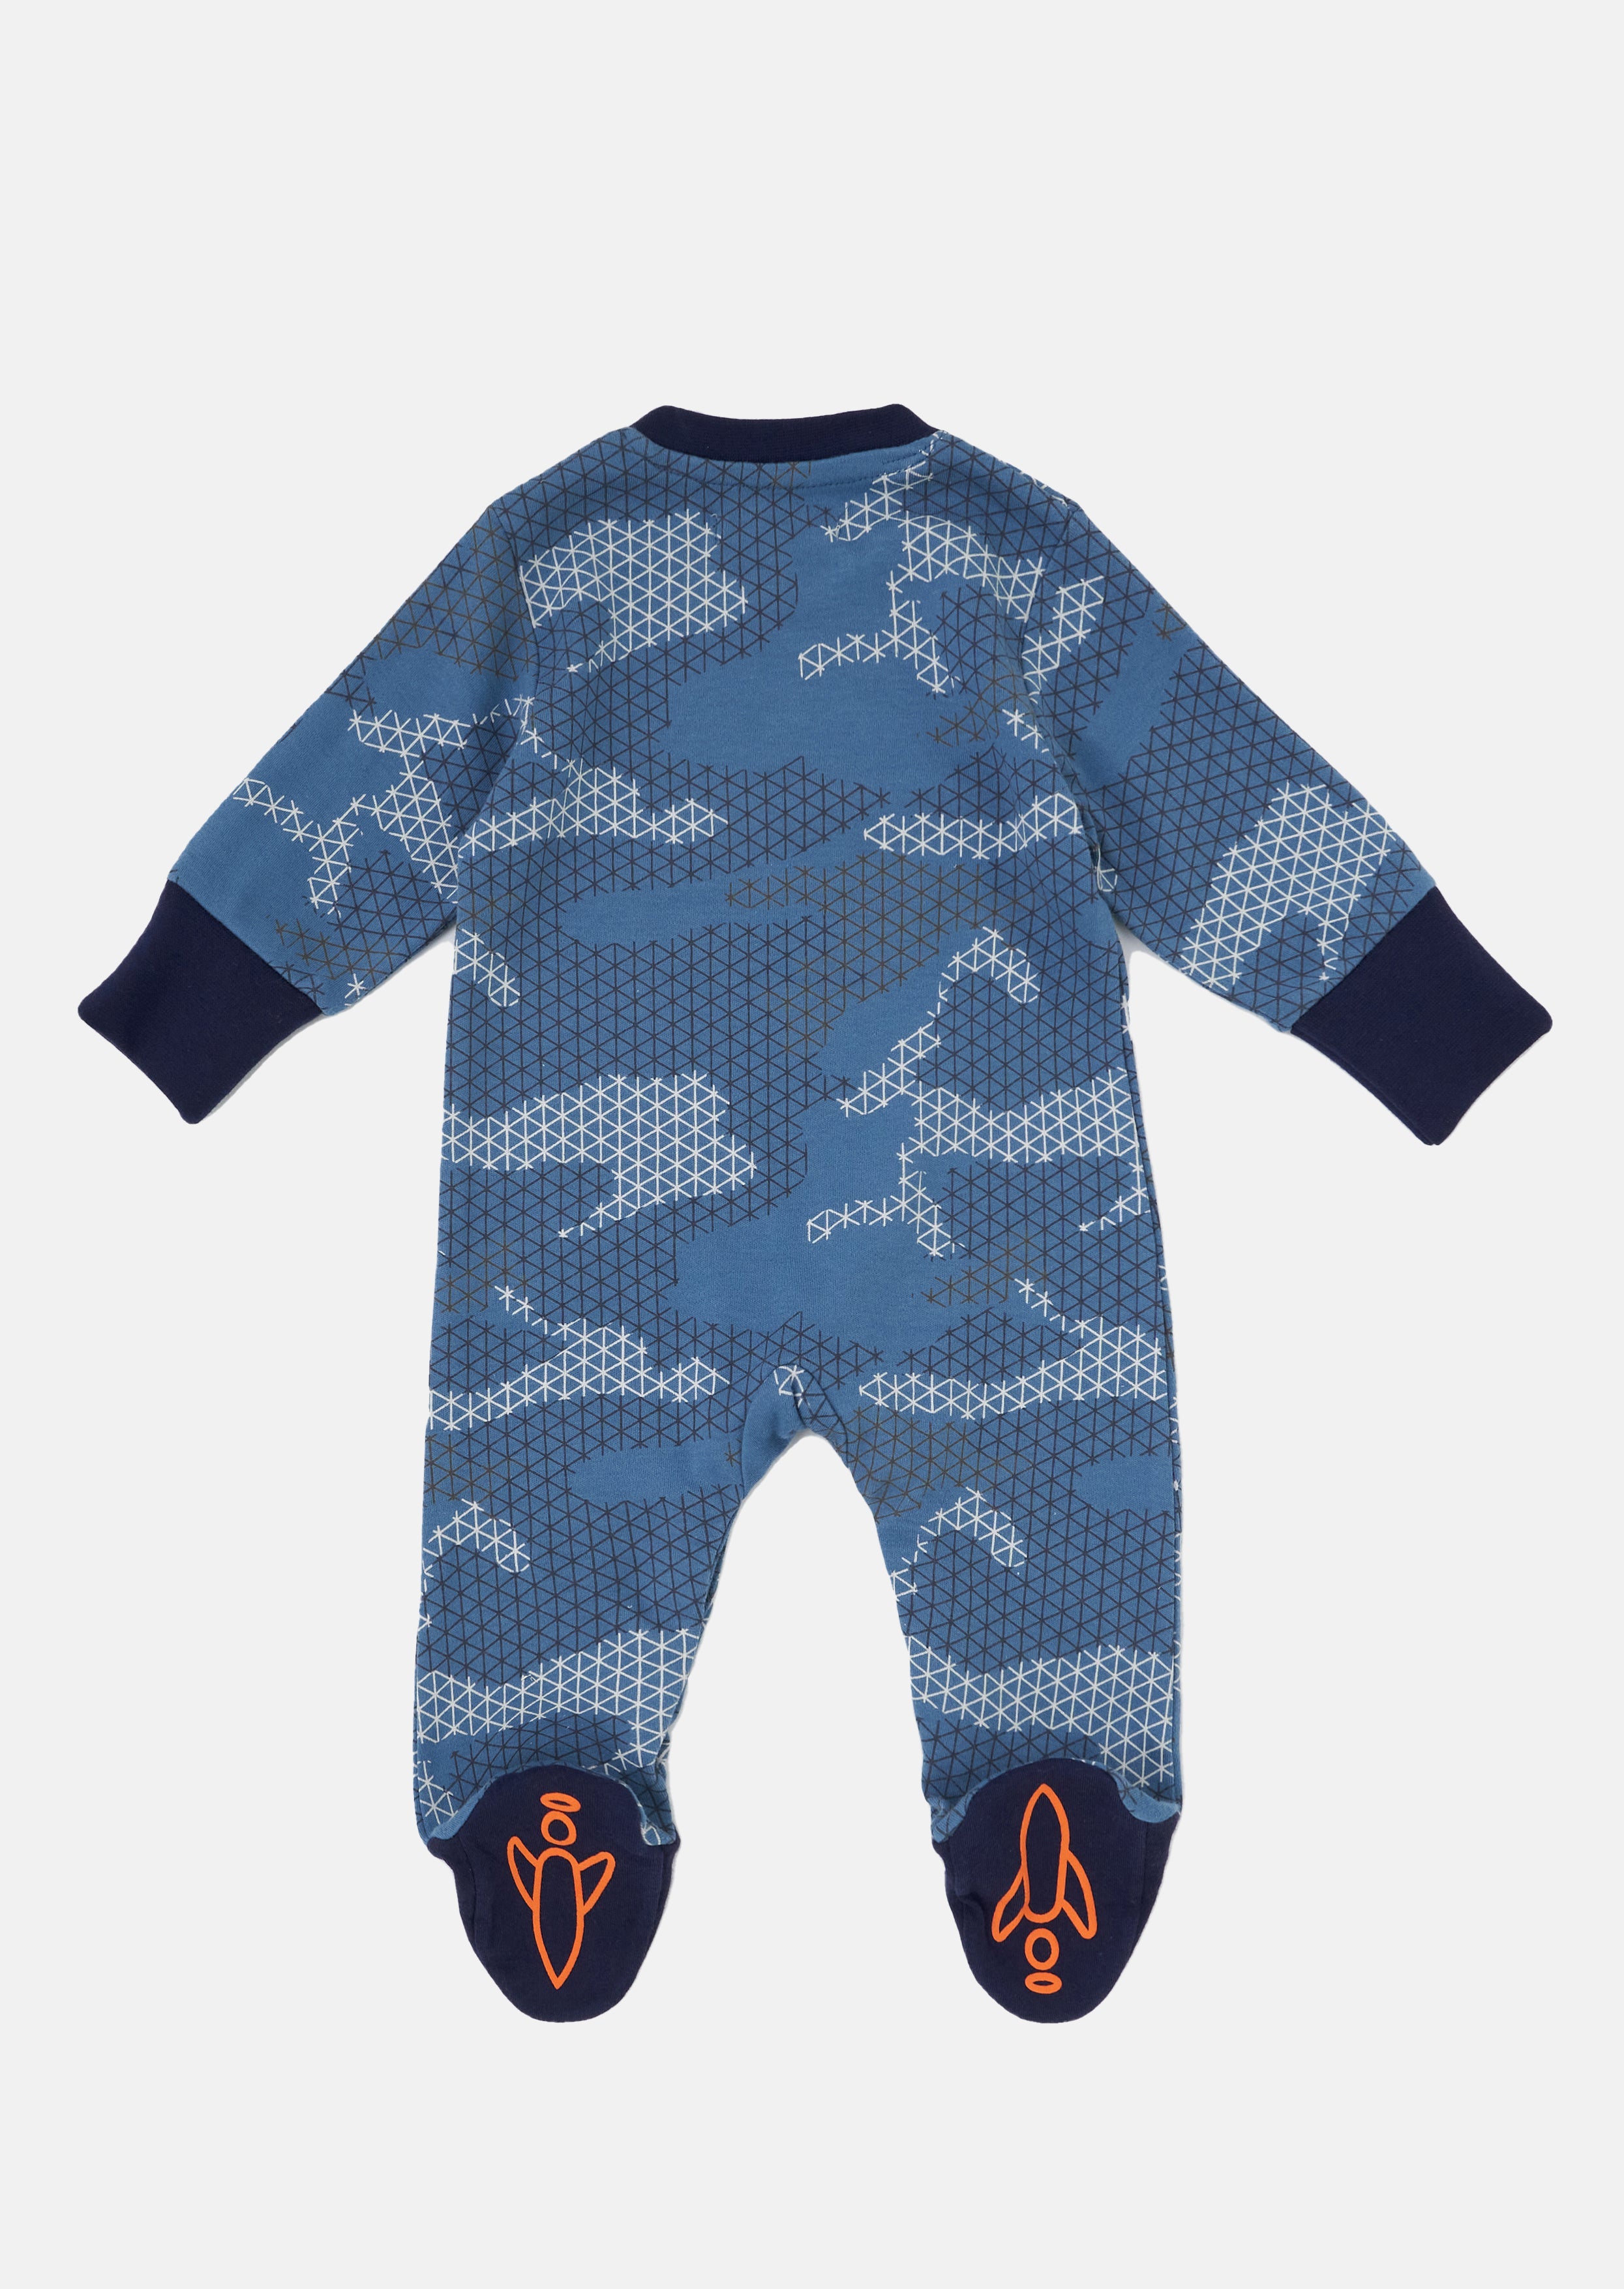 Baby Boy Camo Printed All in One Blue Sleepsuit